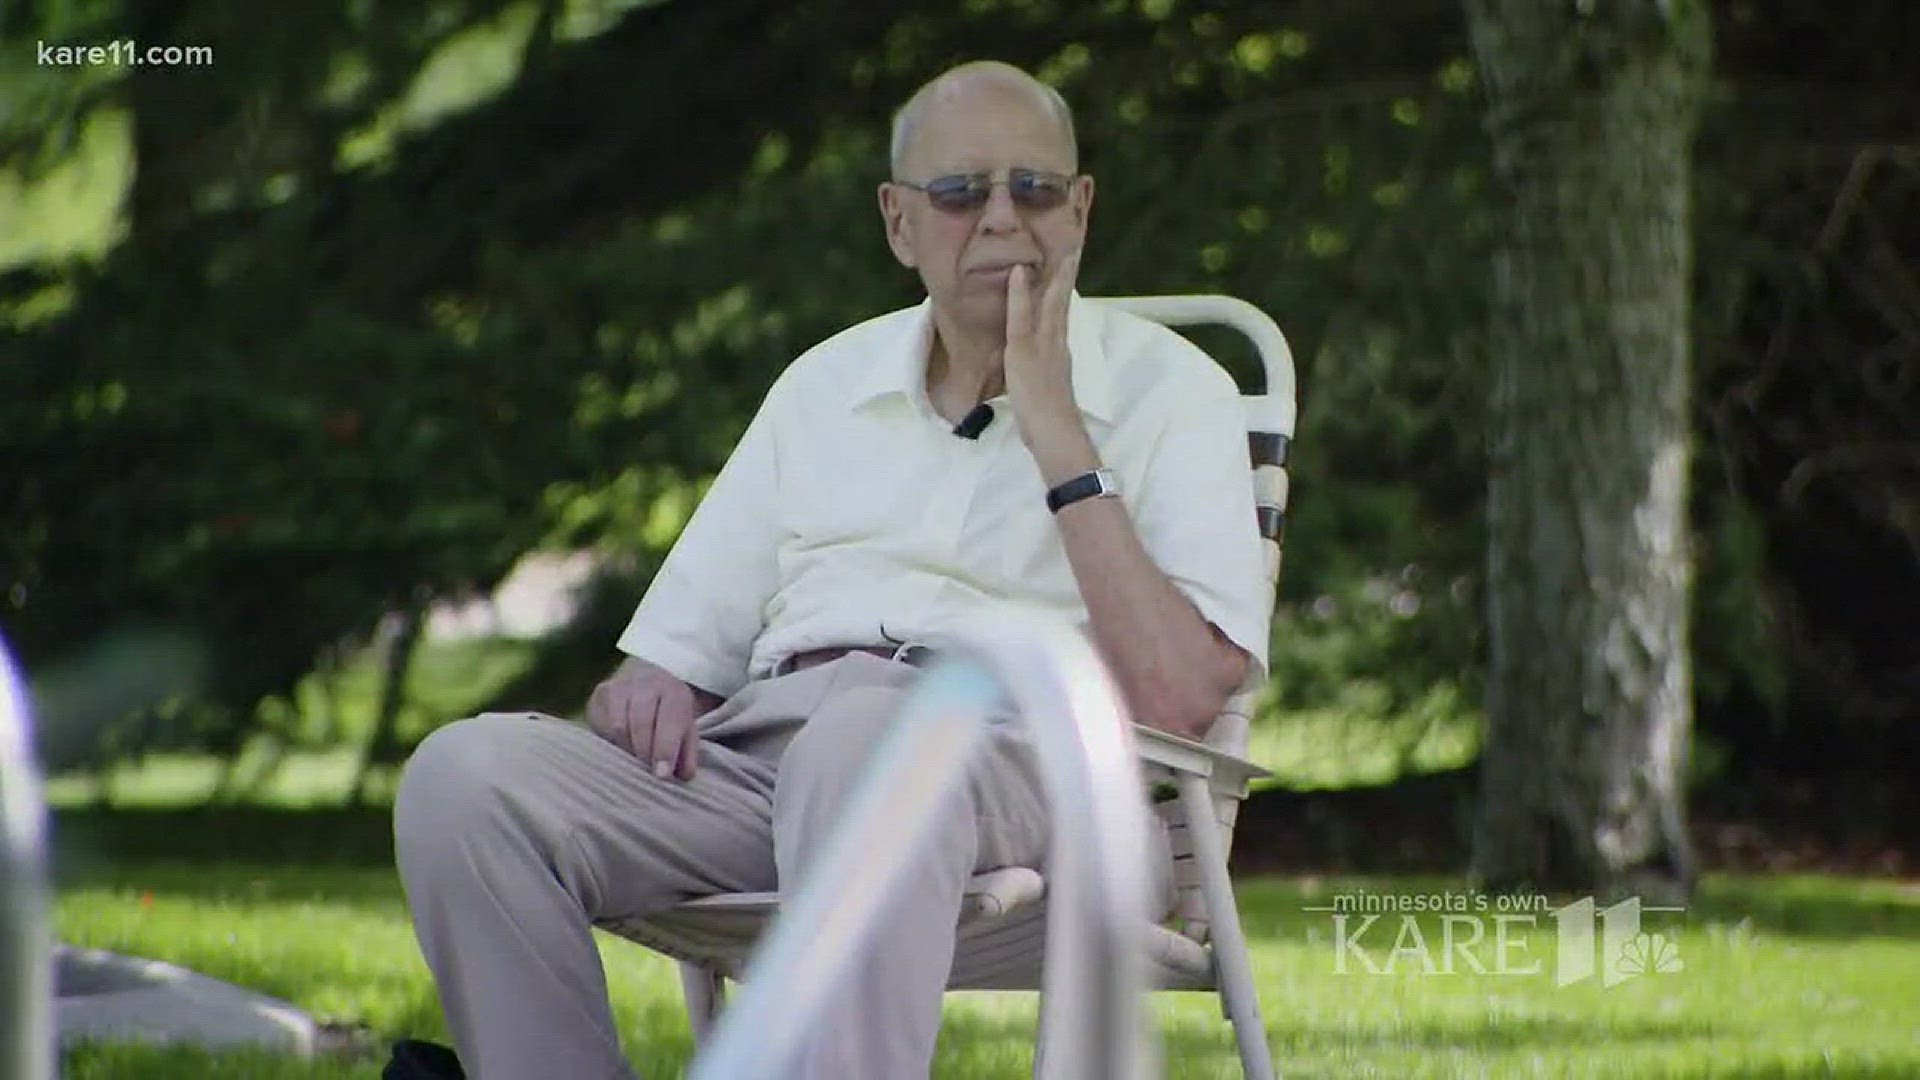 This story about a 94-year-old retired judge who installed a pool in his backyard for the neighborhood kids was our most-watched Land of 10,000 Stories in 2017. http://kare11.tv/2lAAKlC